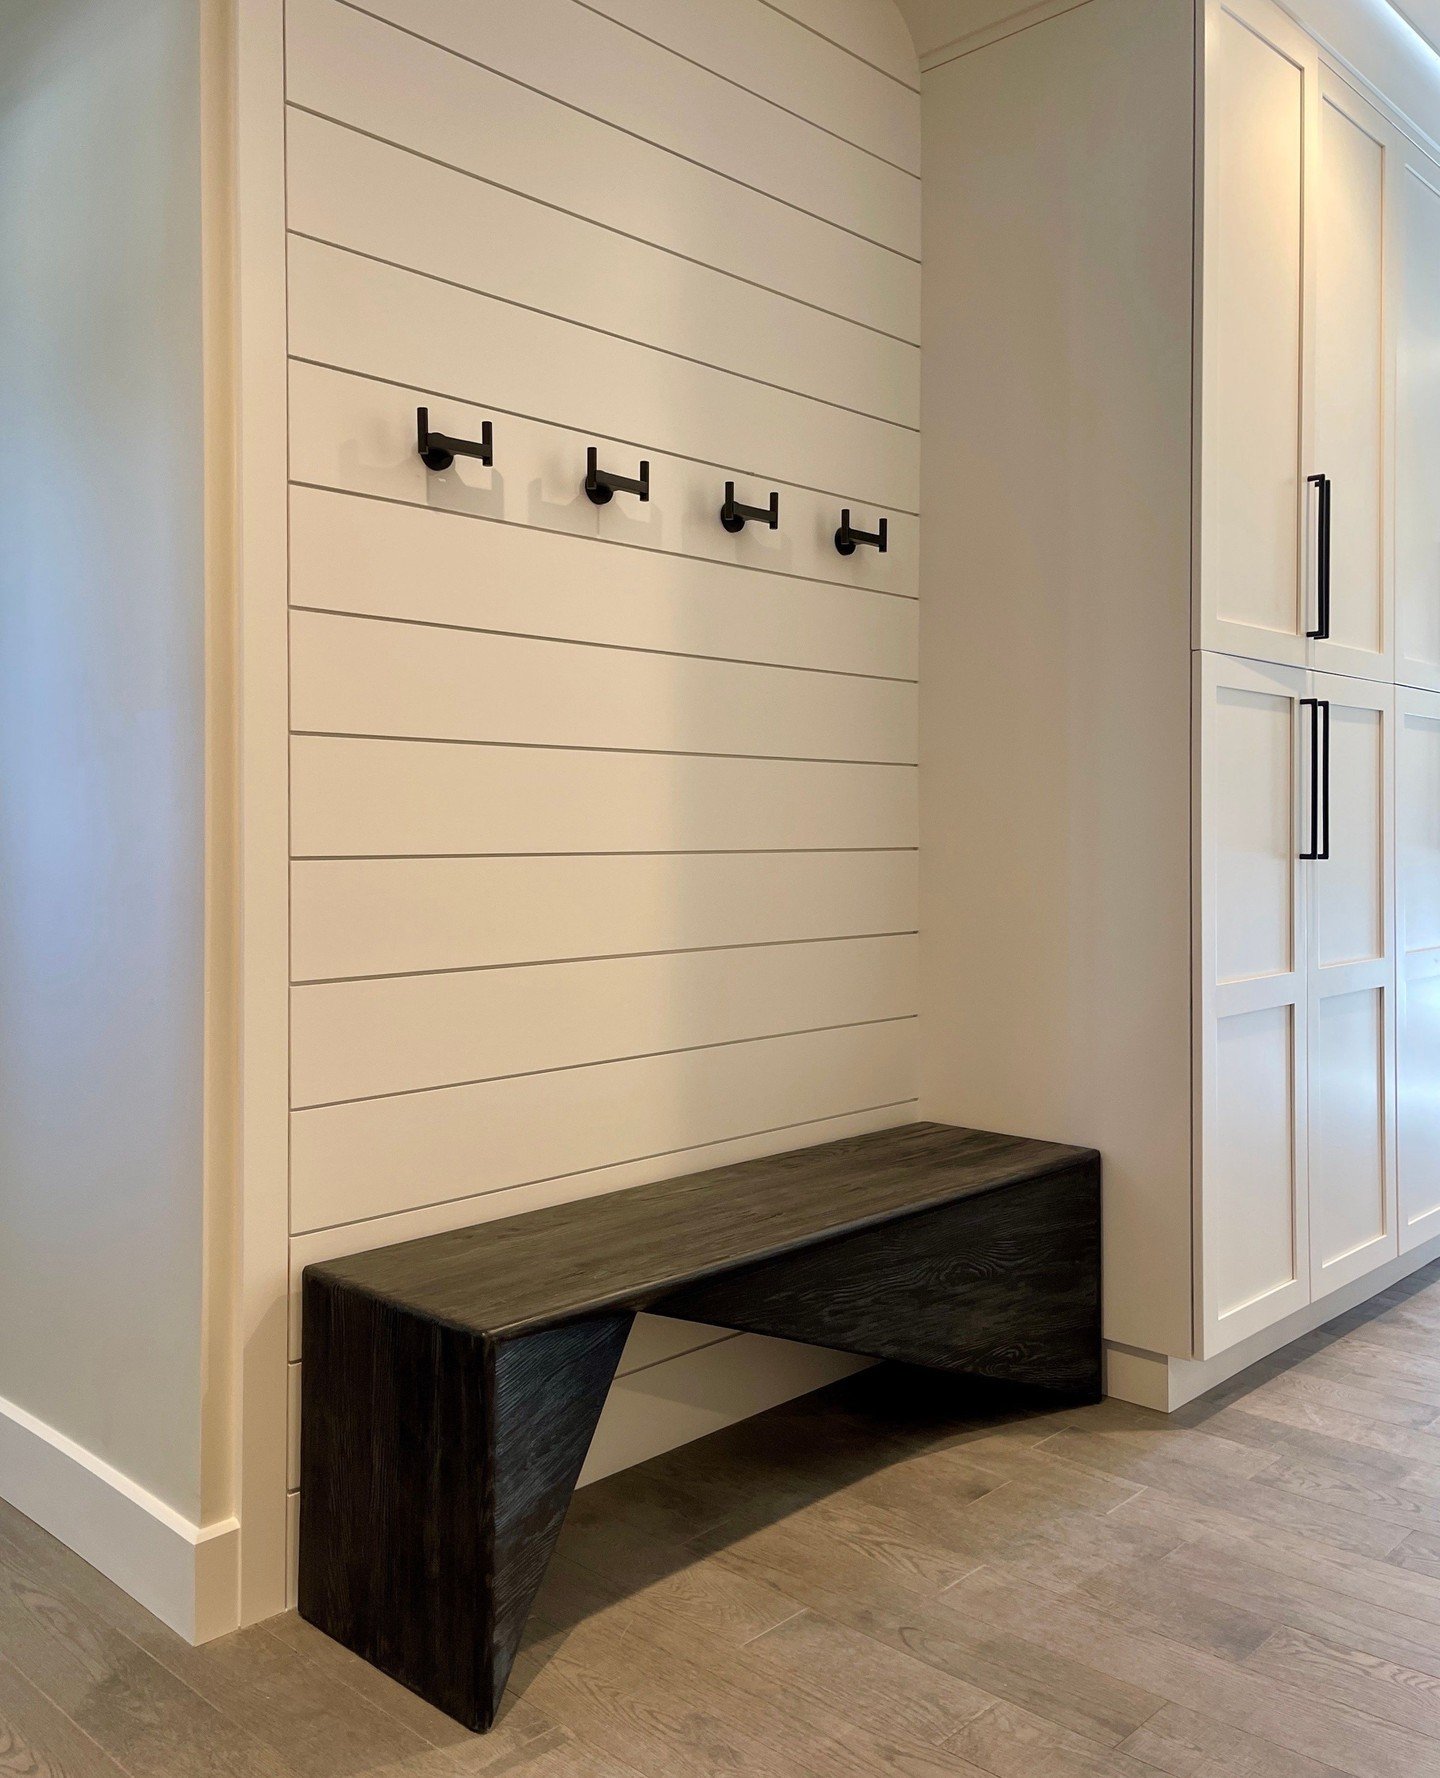 Redefining the 'modern' in modern farmhouse, with our sleek and chic mudroom design⁠
.⁠
.⁠
.⁠
.⁠
#mydesign #ModernFarmhouseMudroom #MudroomDesign #MudroomInspiration #MudroomDecor #OrganizedEntry #FunctionalDesign #EntrywayGoals #HomeOrganization #In